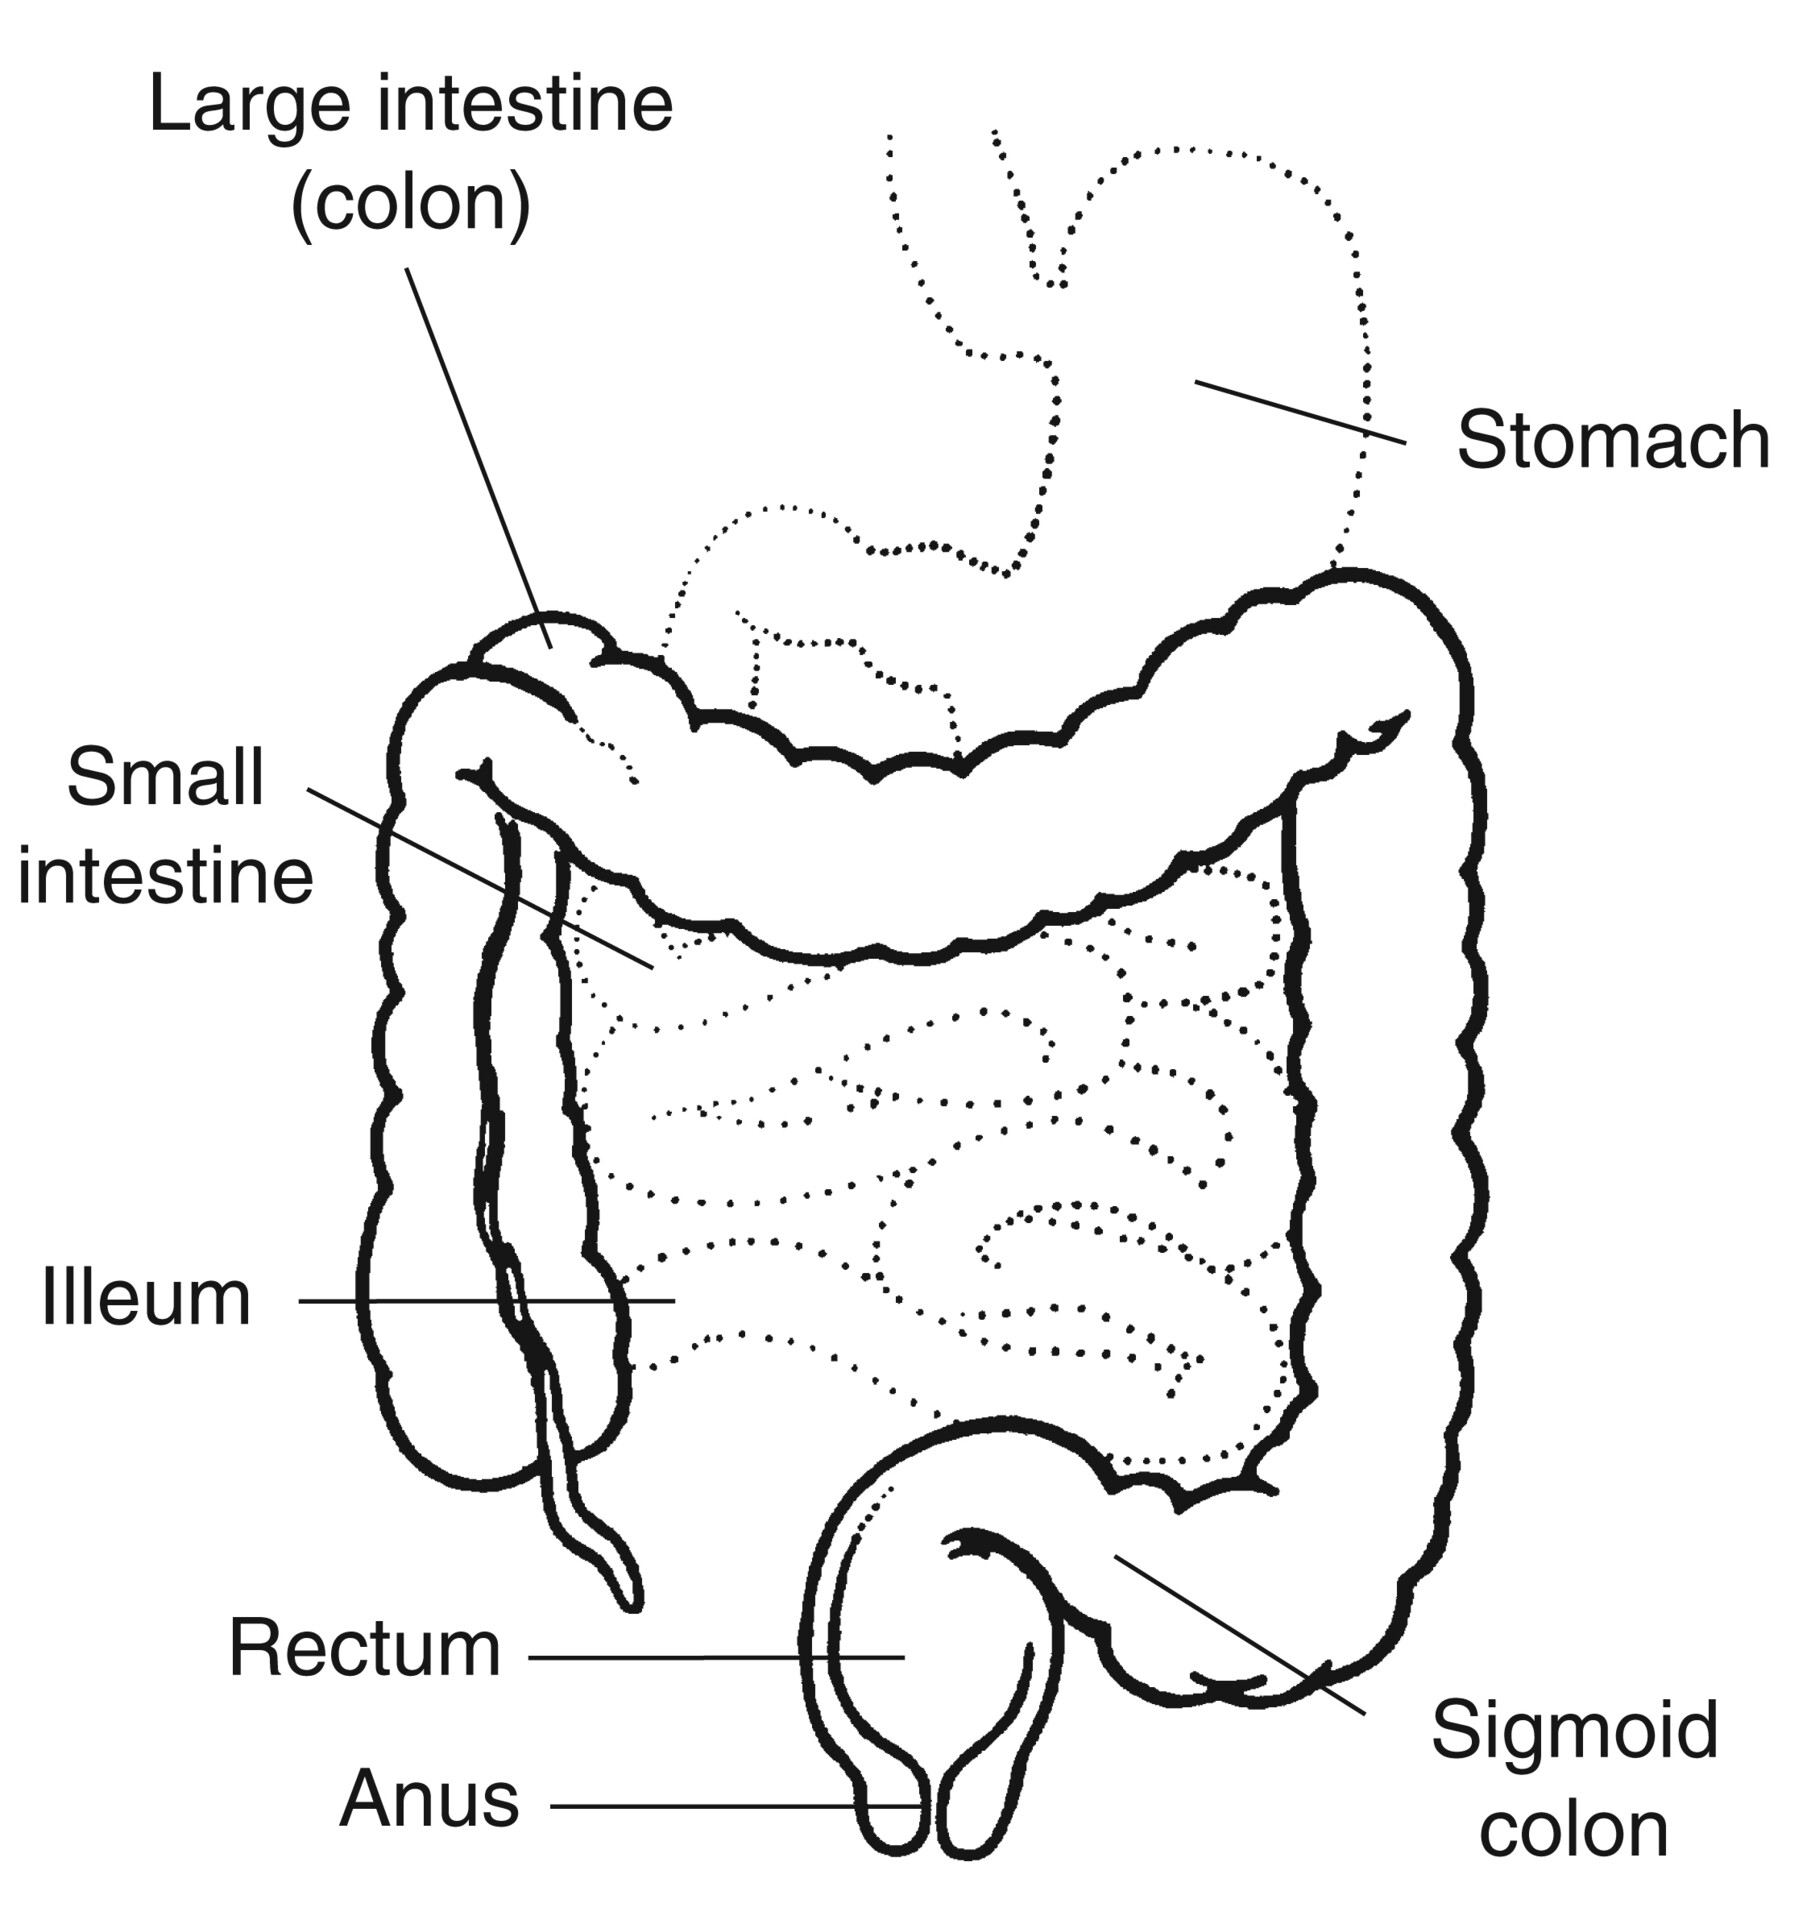 Digestive tract with labels pointing to the liver, stomach, small intestine,  colon, rectum, and anus - Media Asset - NIDDK